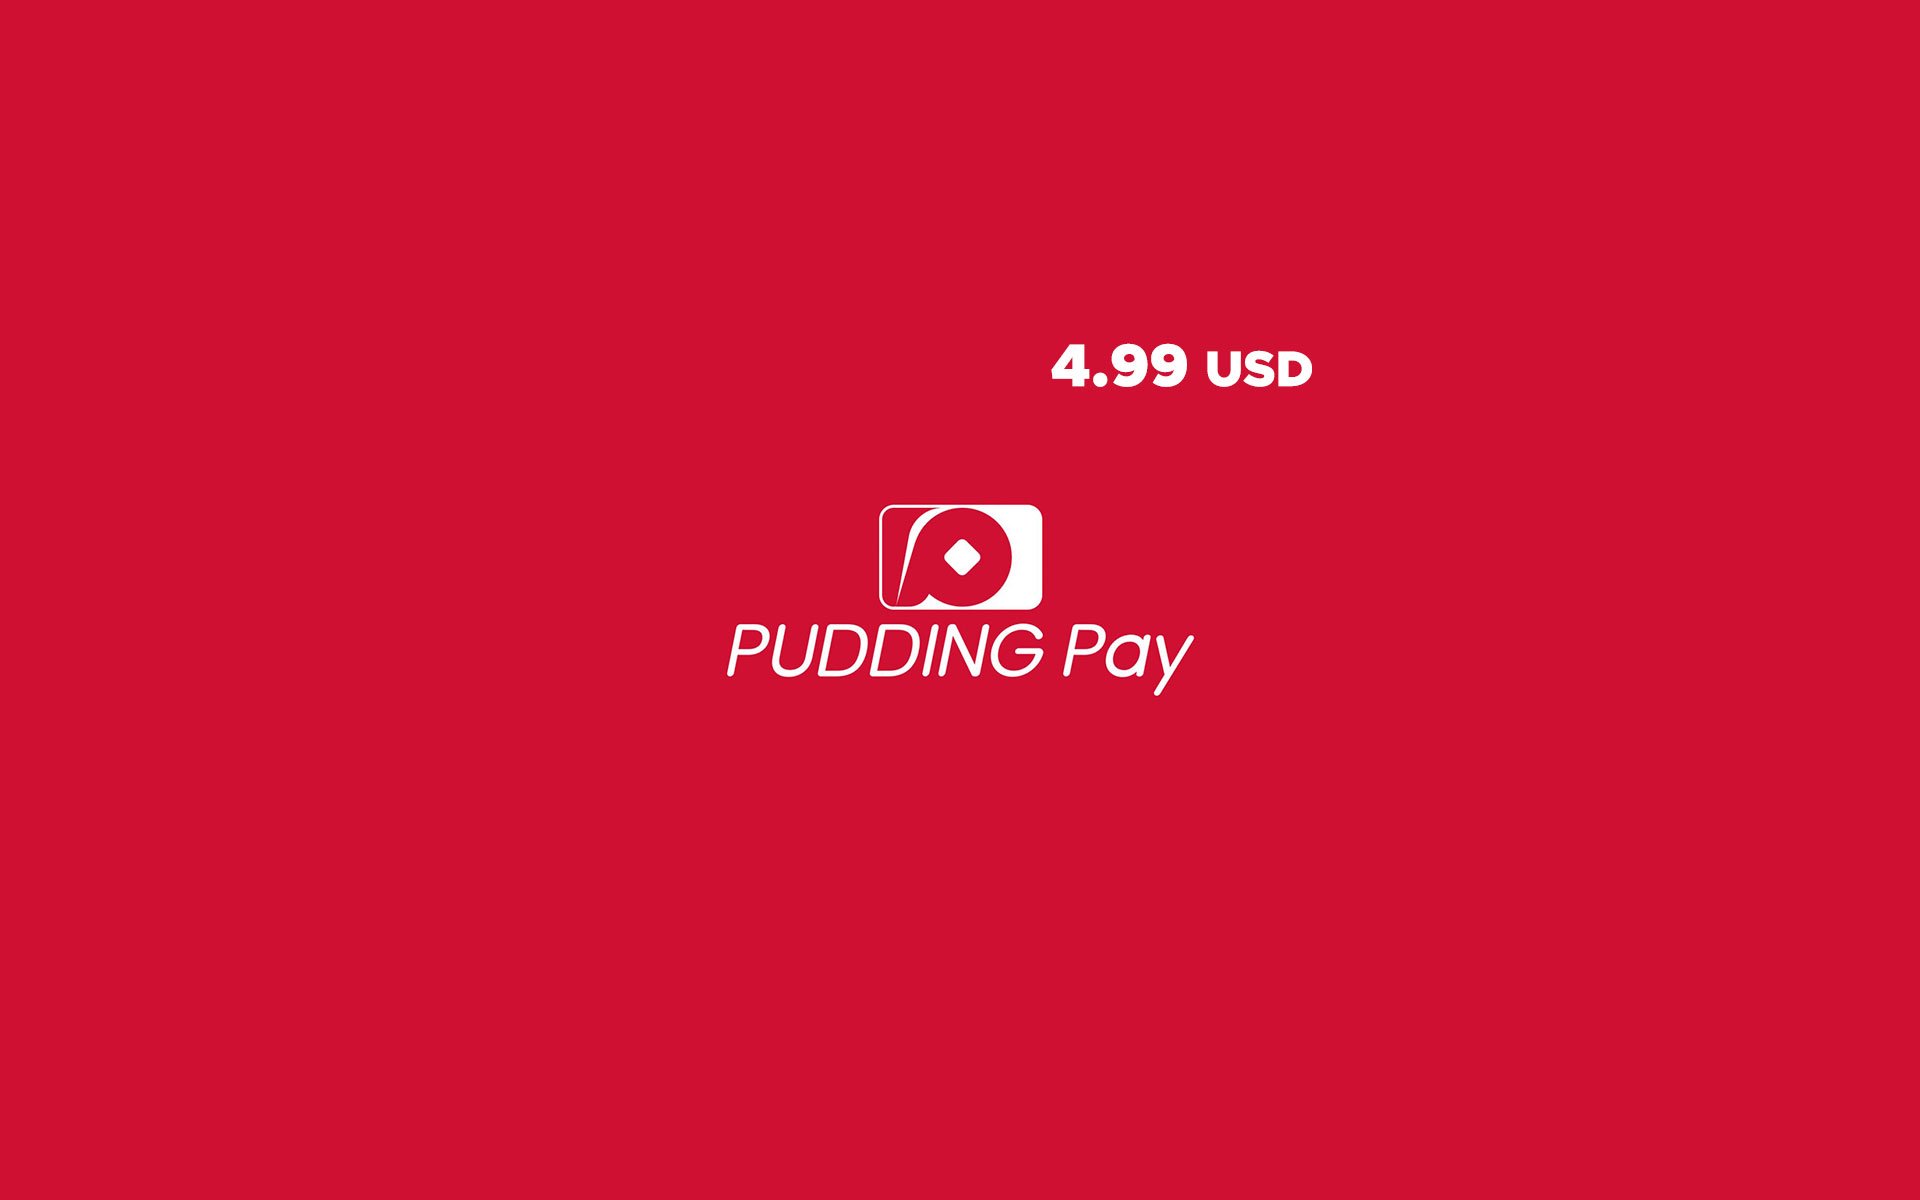 4.99 USD Pudding Pay cover